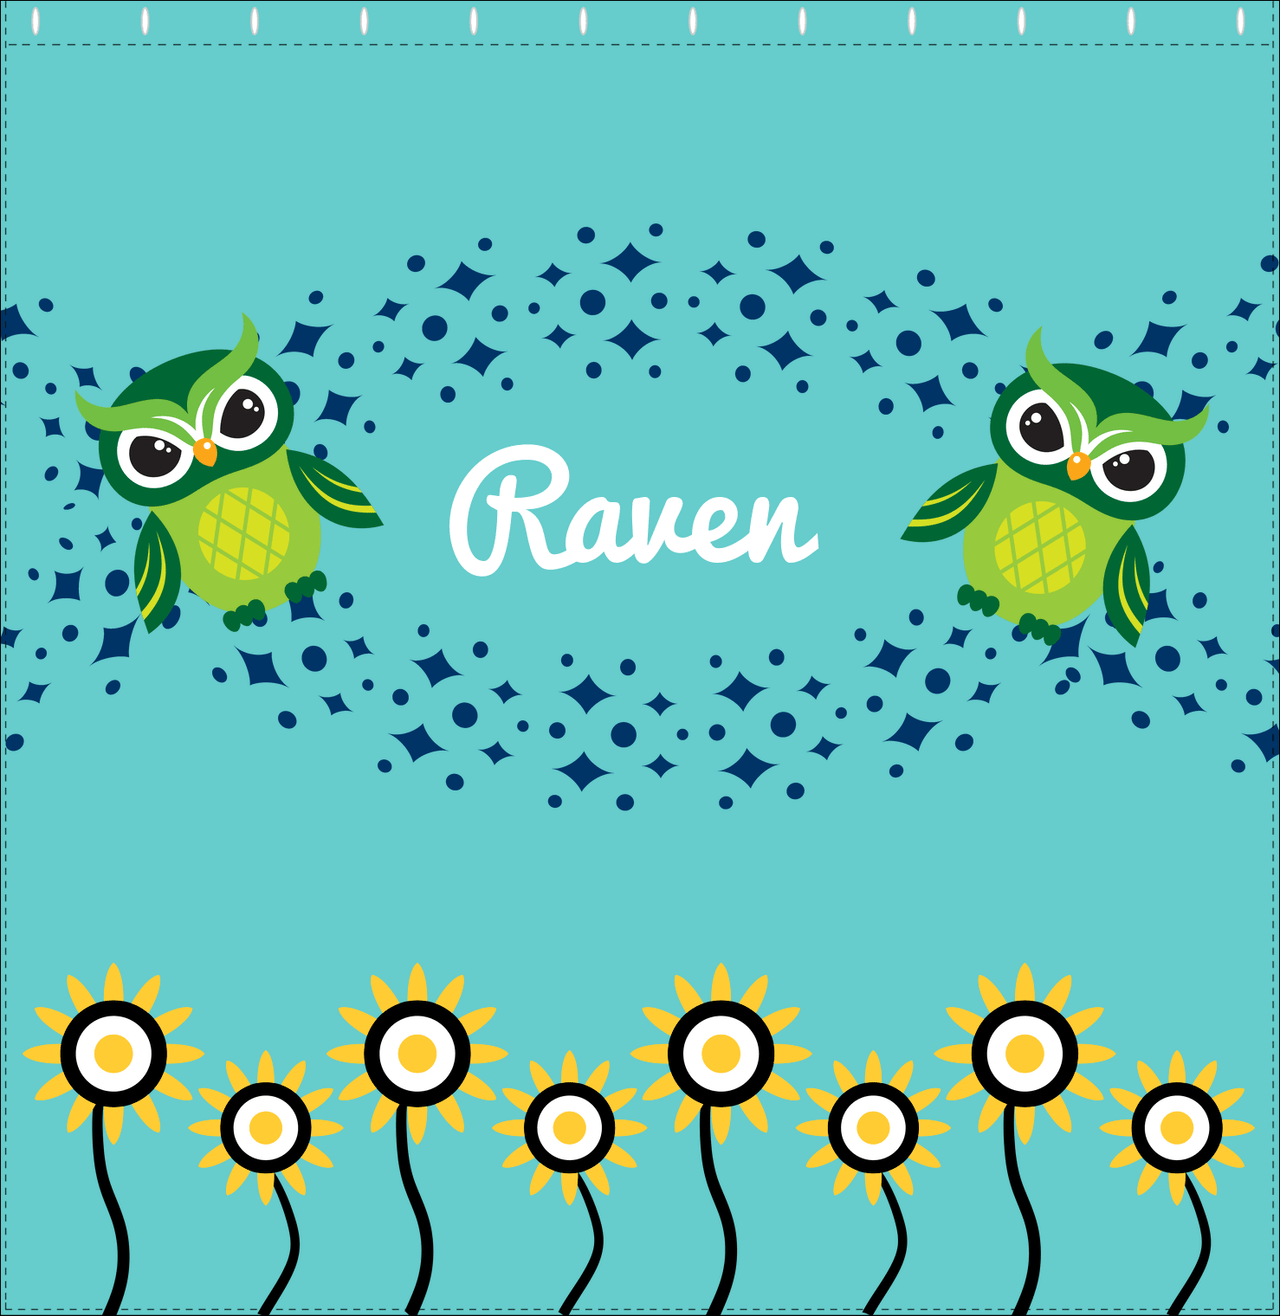 Personalized Owl Shower Curtain V - Owl 03 - Teal Background - Decorate View